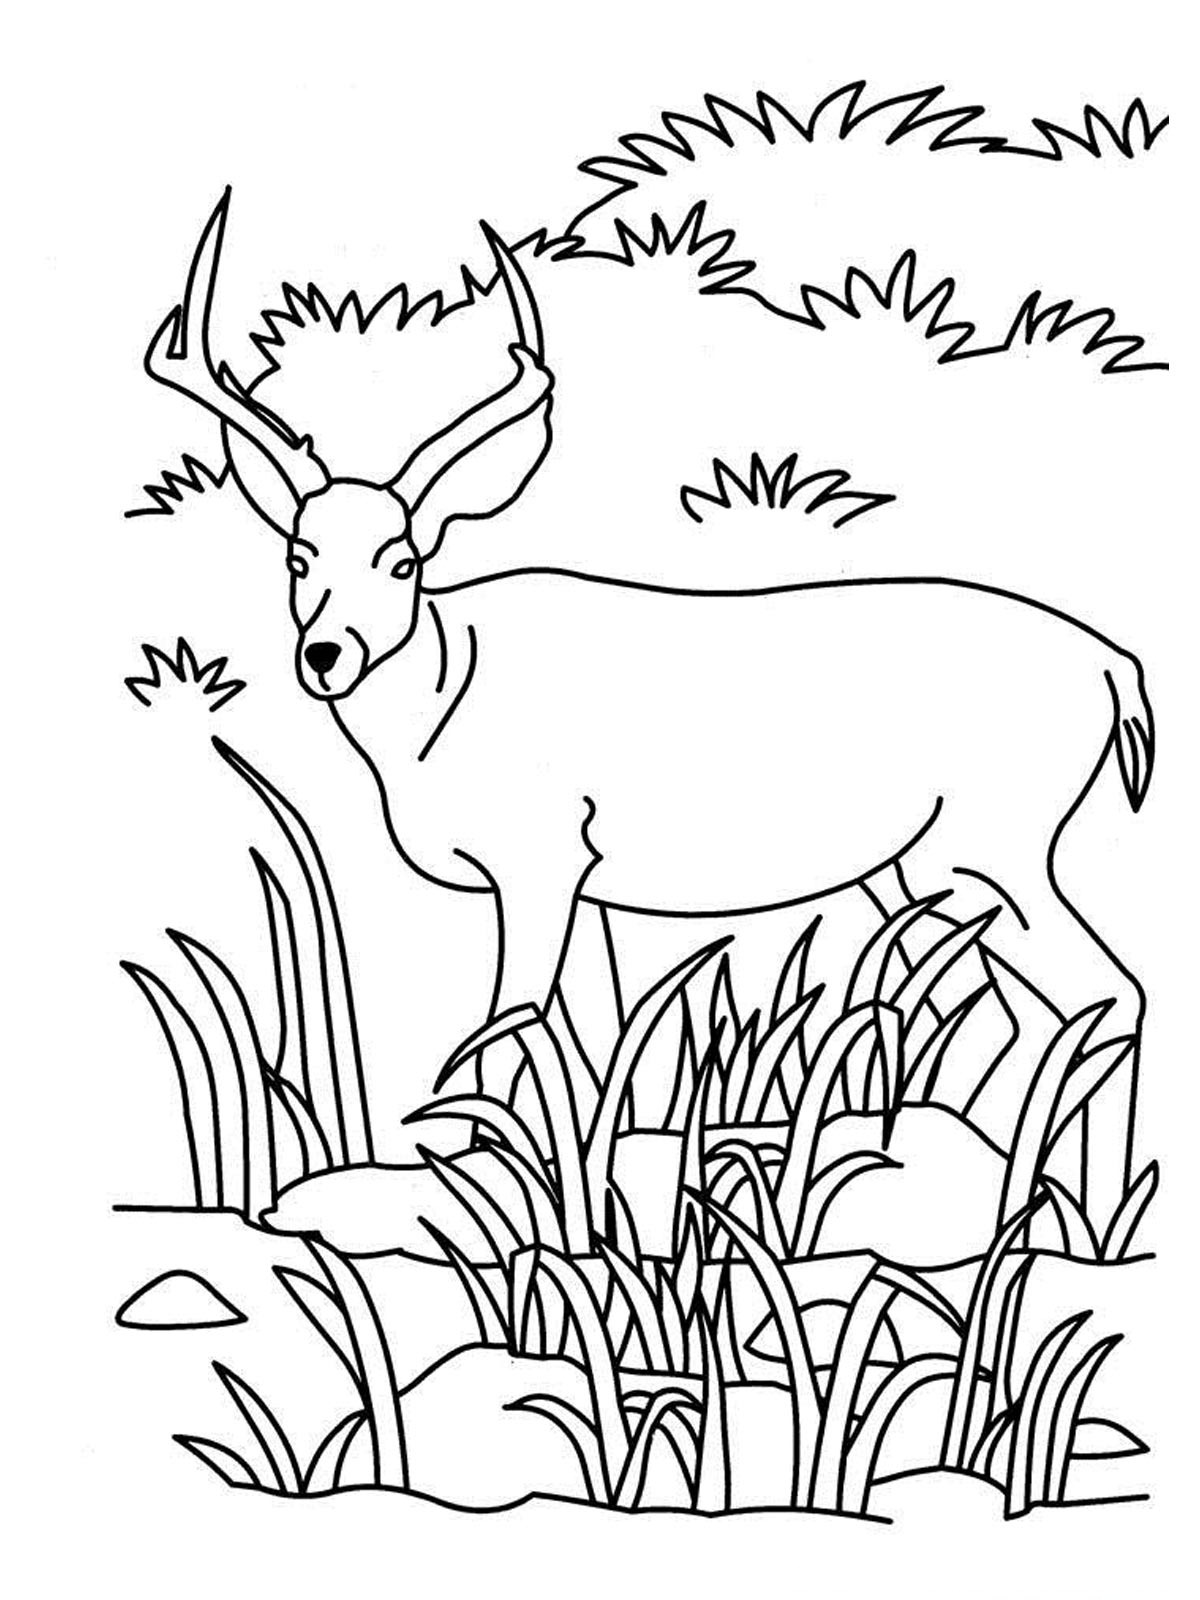 antelope-colouring-page